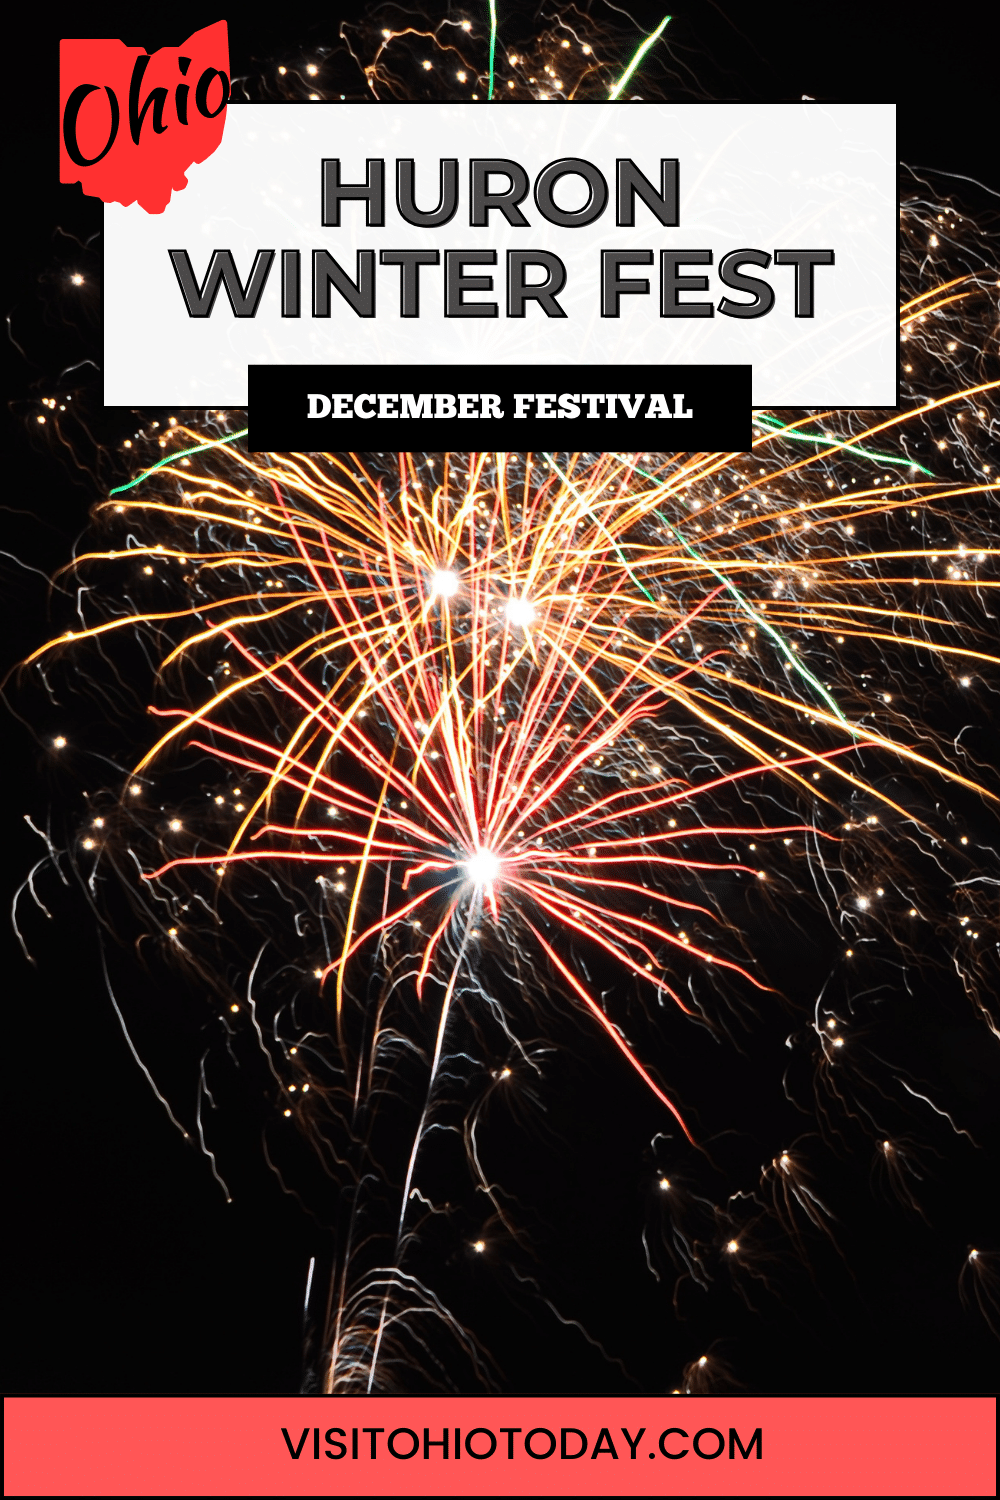 The Huron Winter Fest is a one-day festival held on the first Saturday of December on Main Street, Huron.